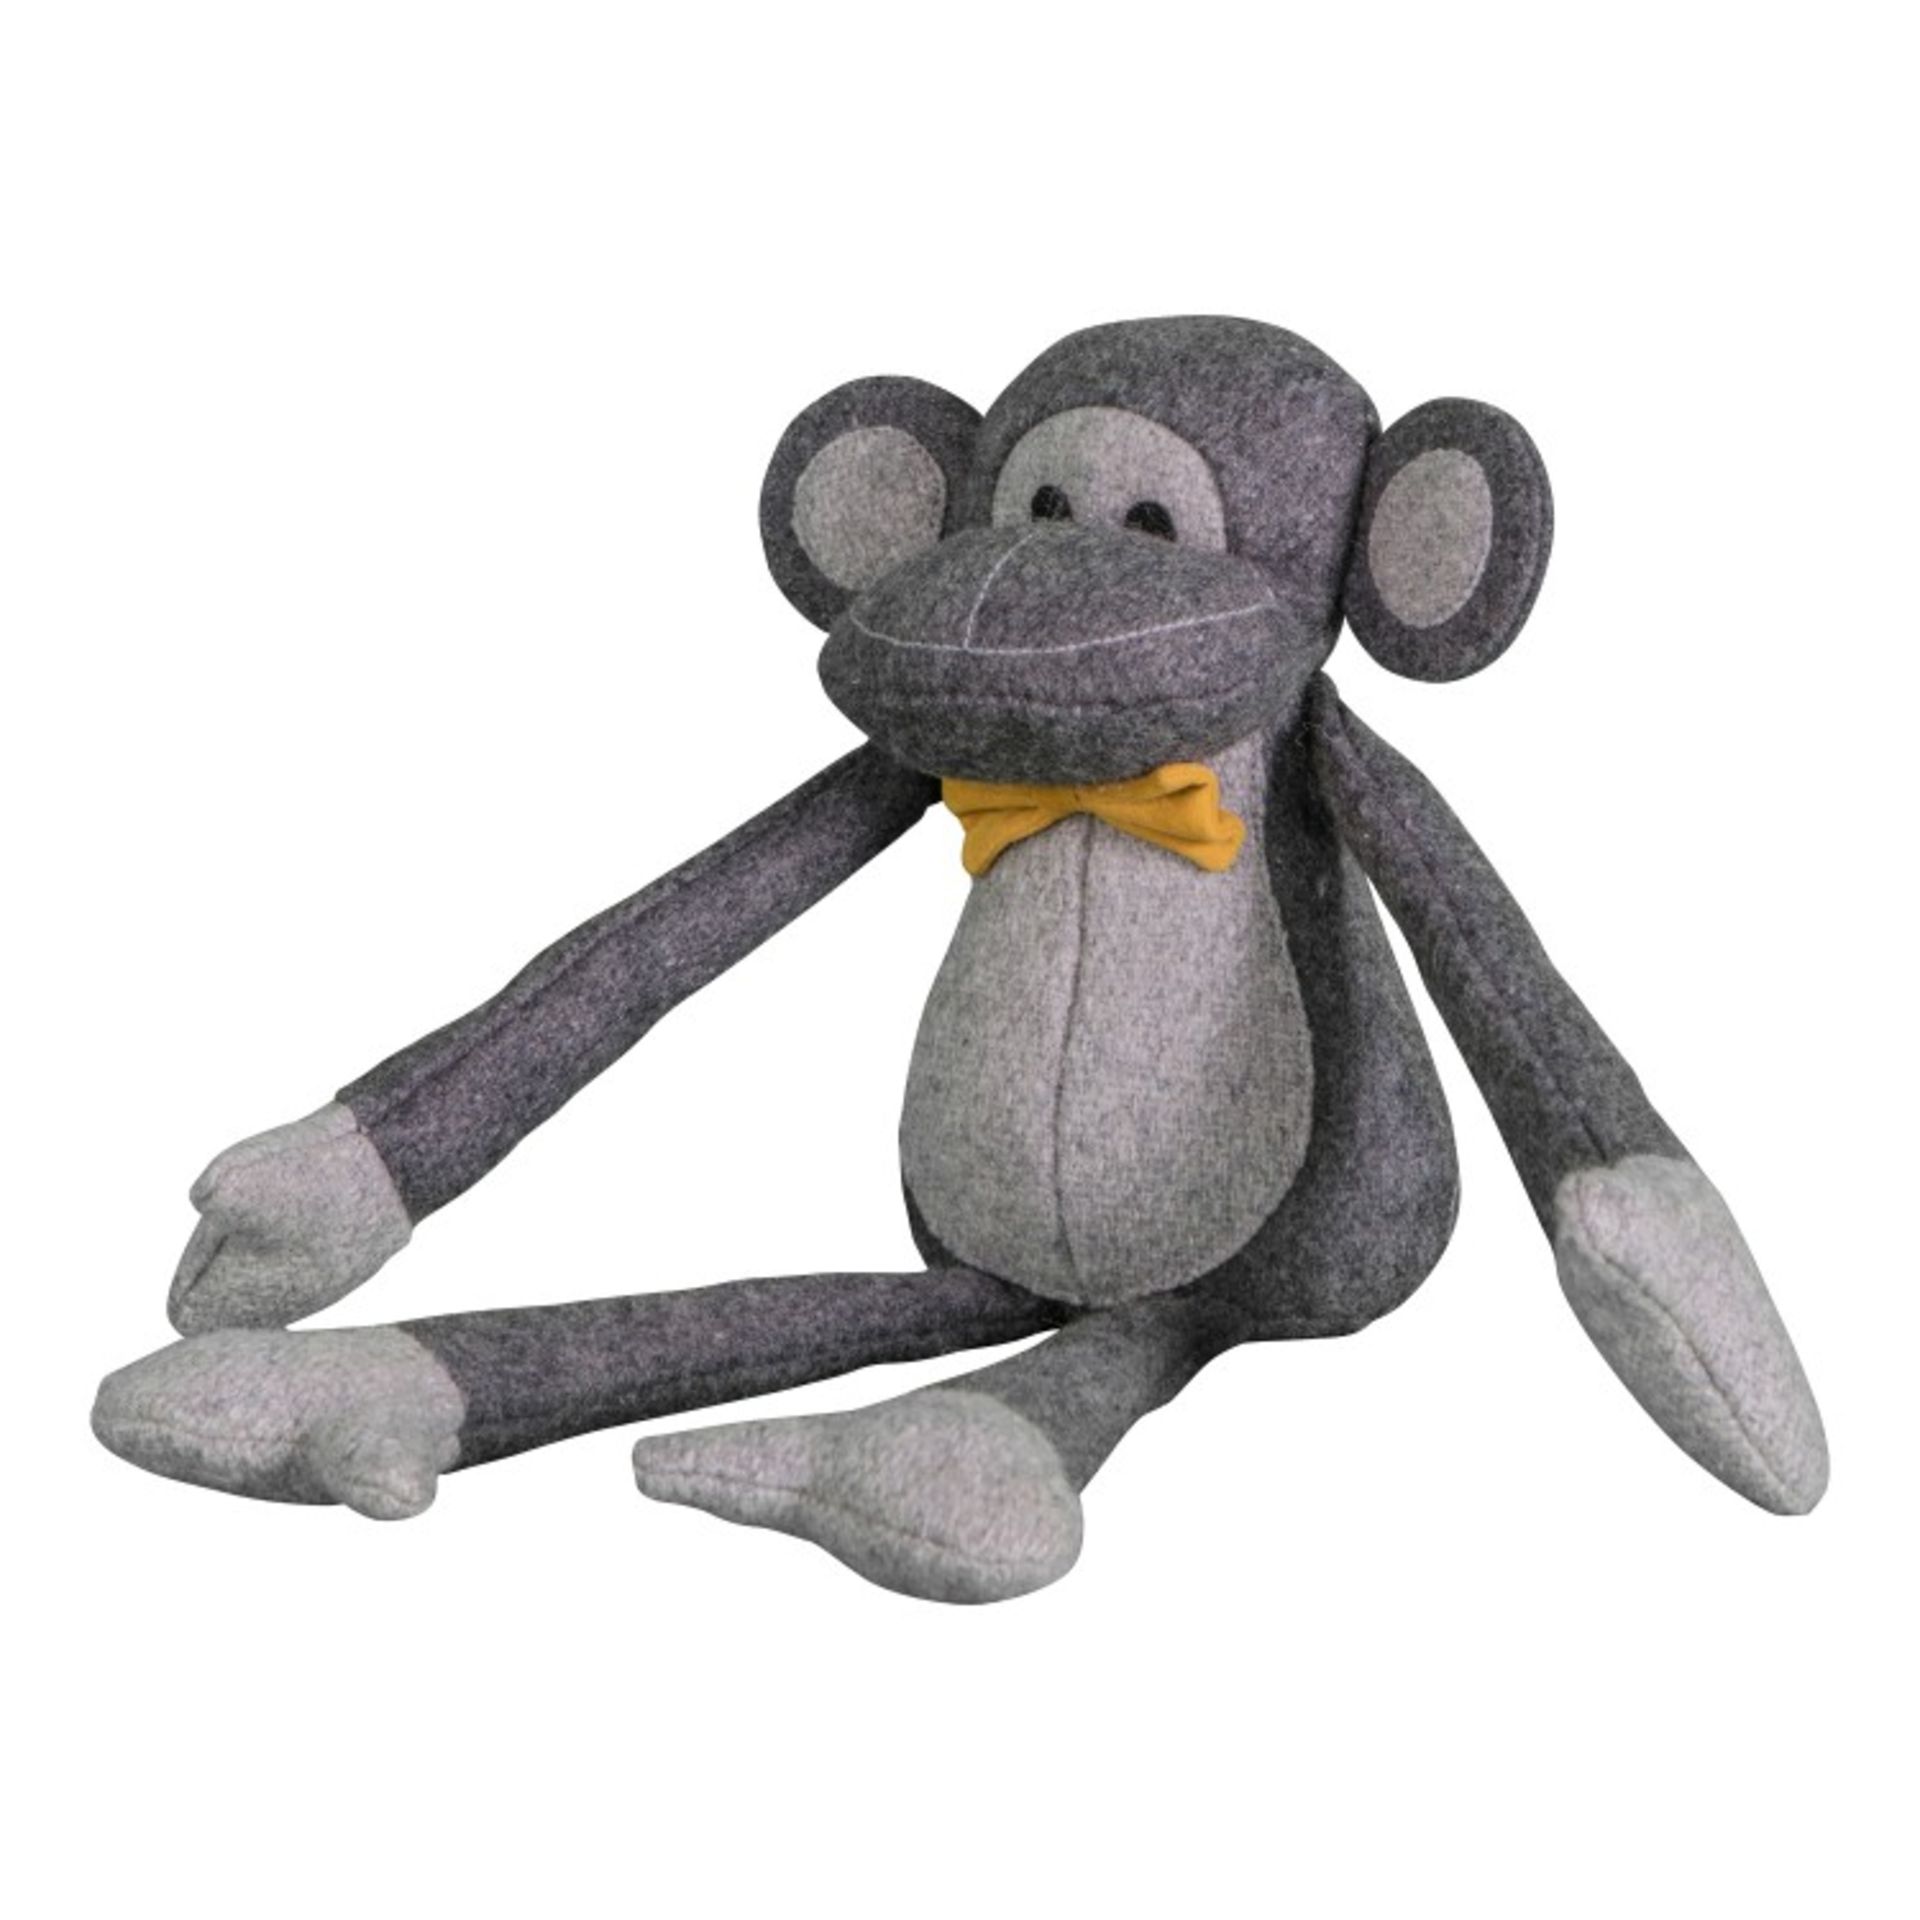 Mike Monkey Doorstop Marmalade Design The Marmalade Designs collection offers a diverse range of